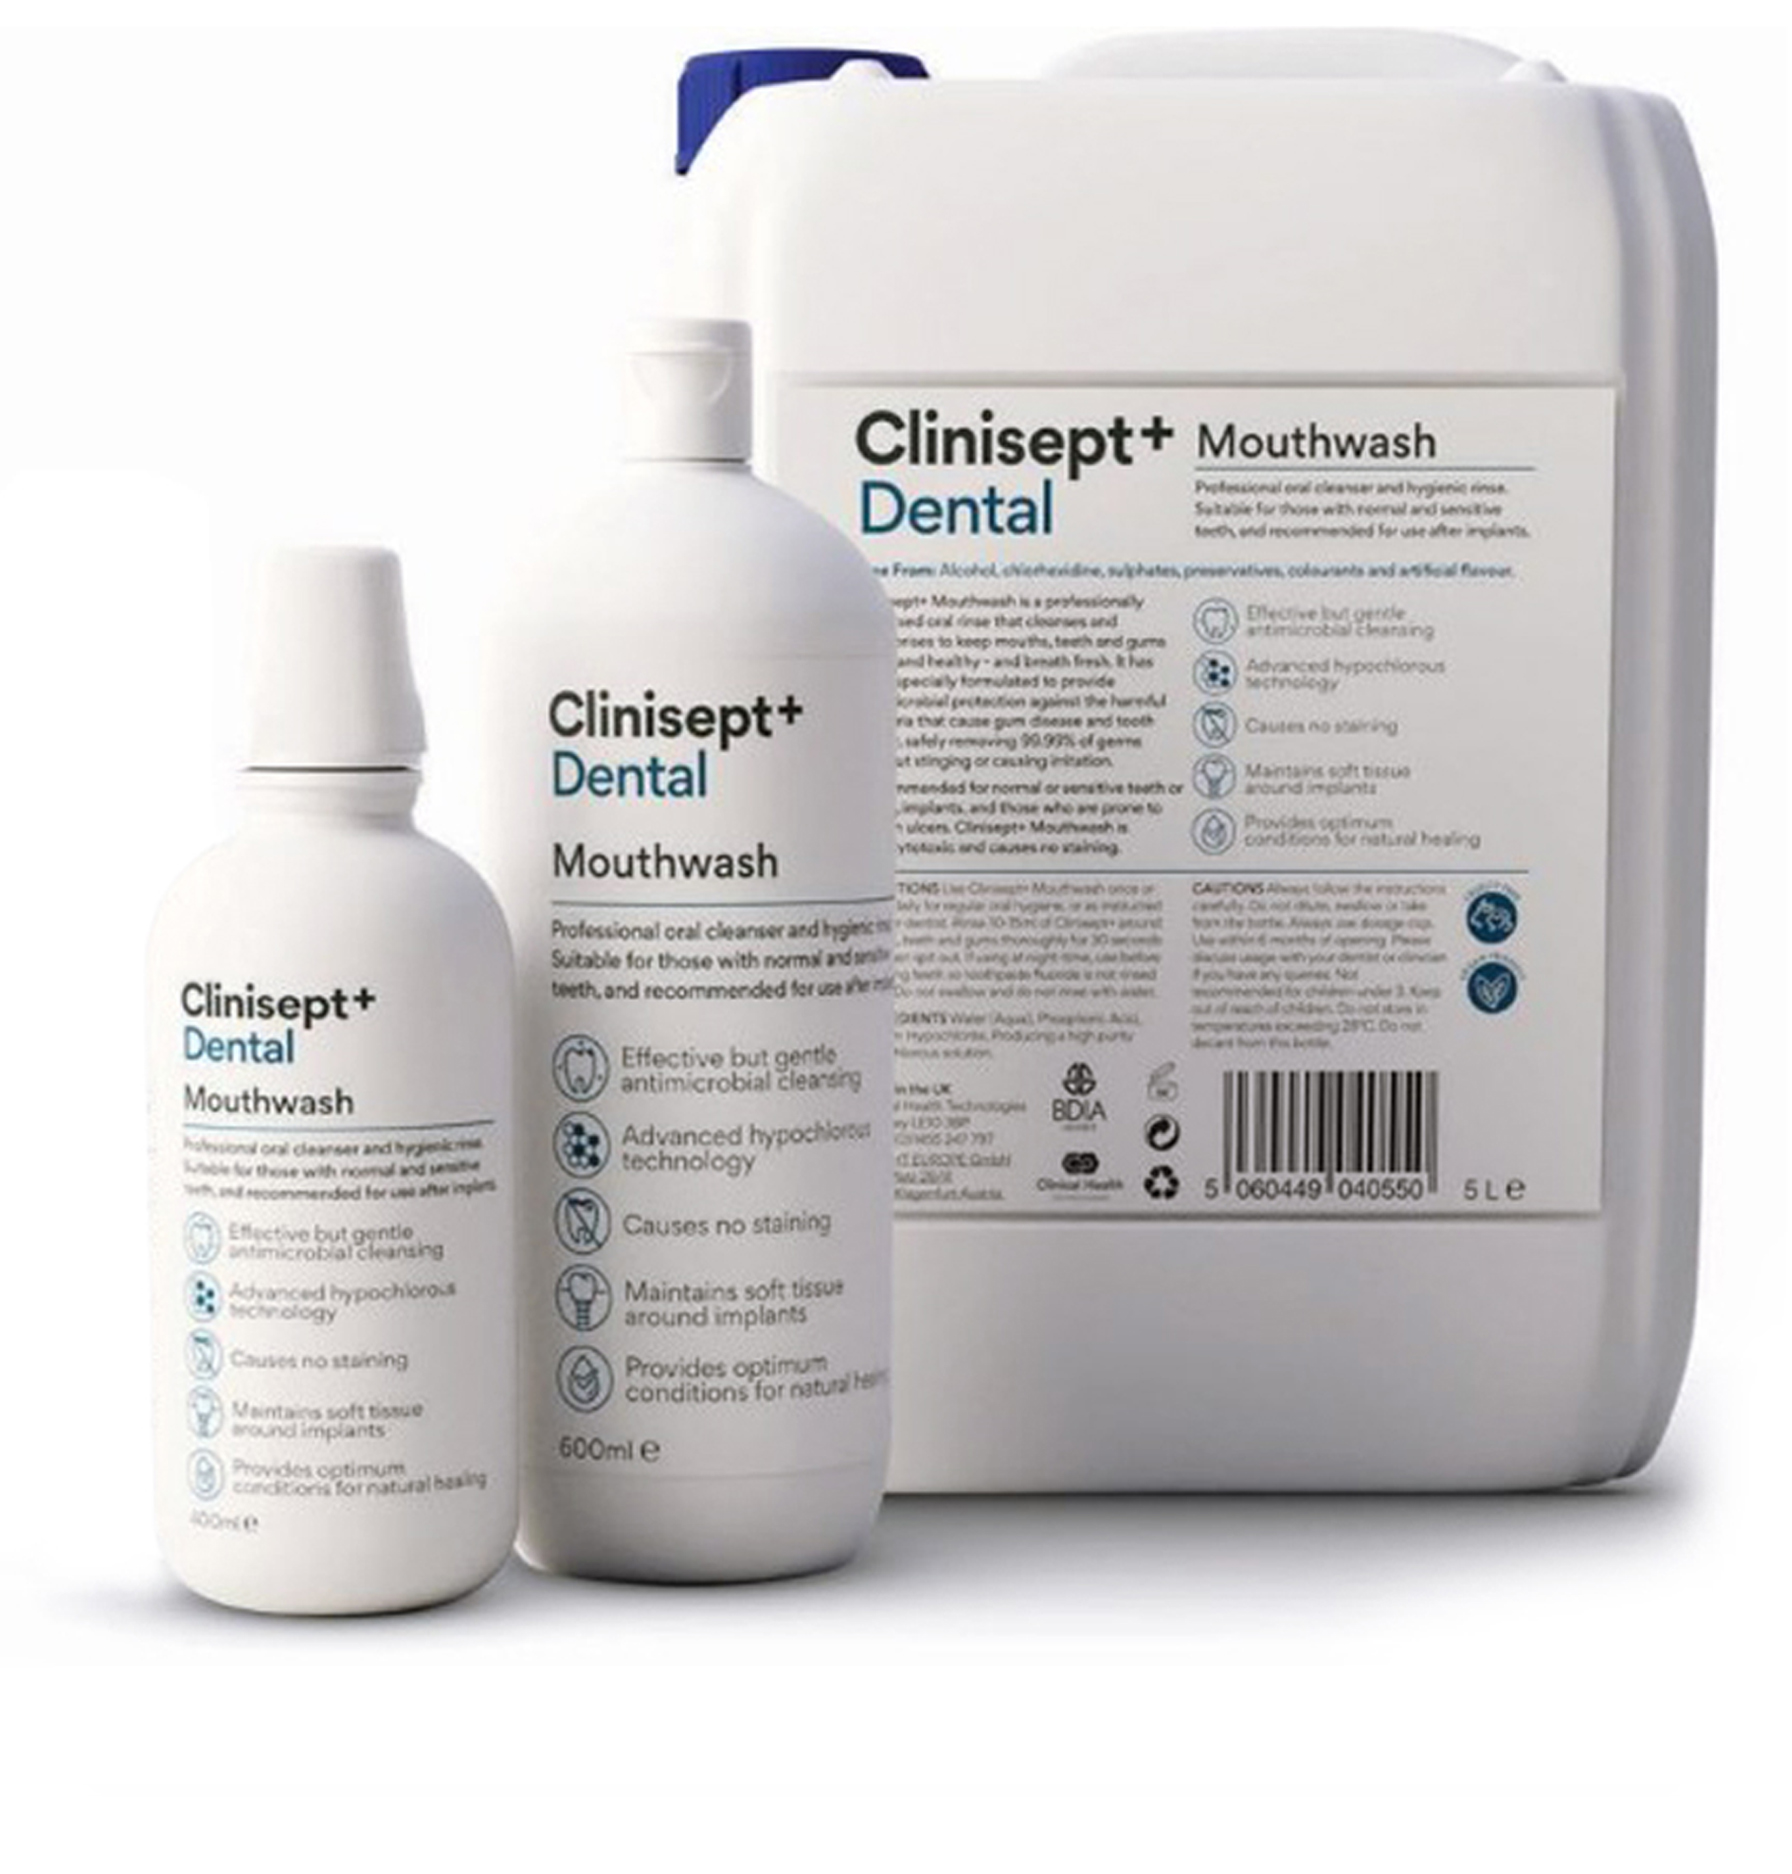 Now in stock: Clinisept+ Dental Mouthwash